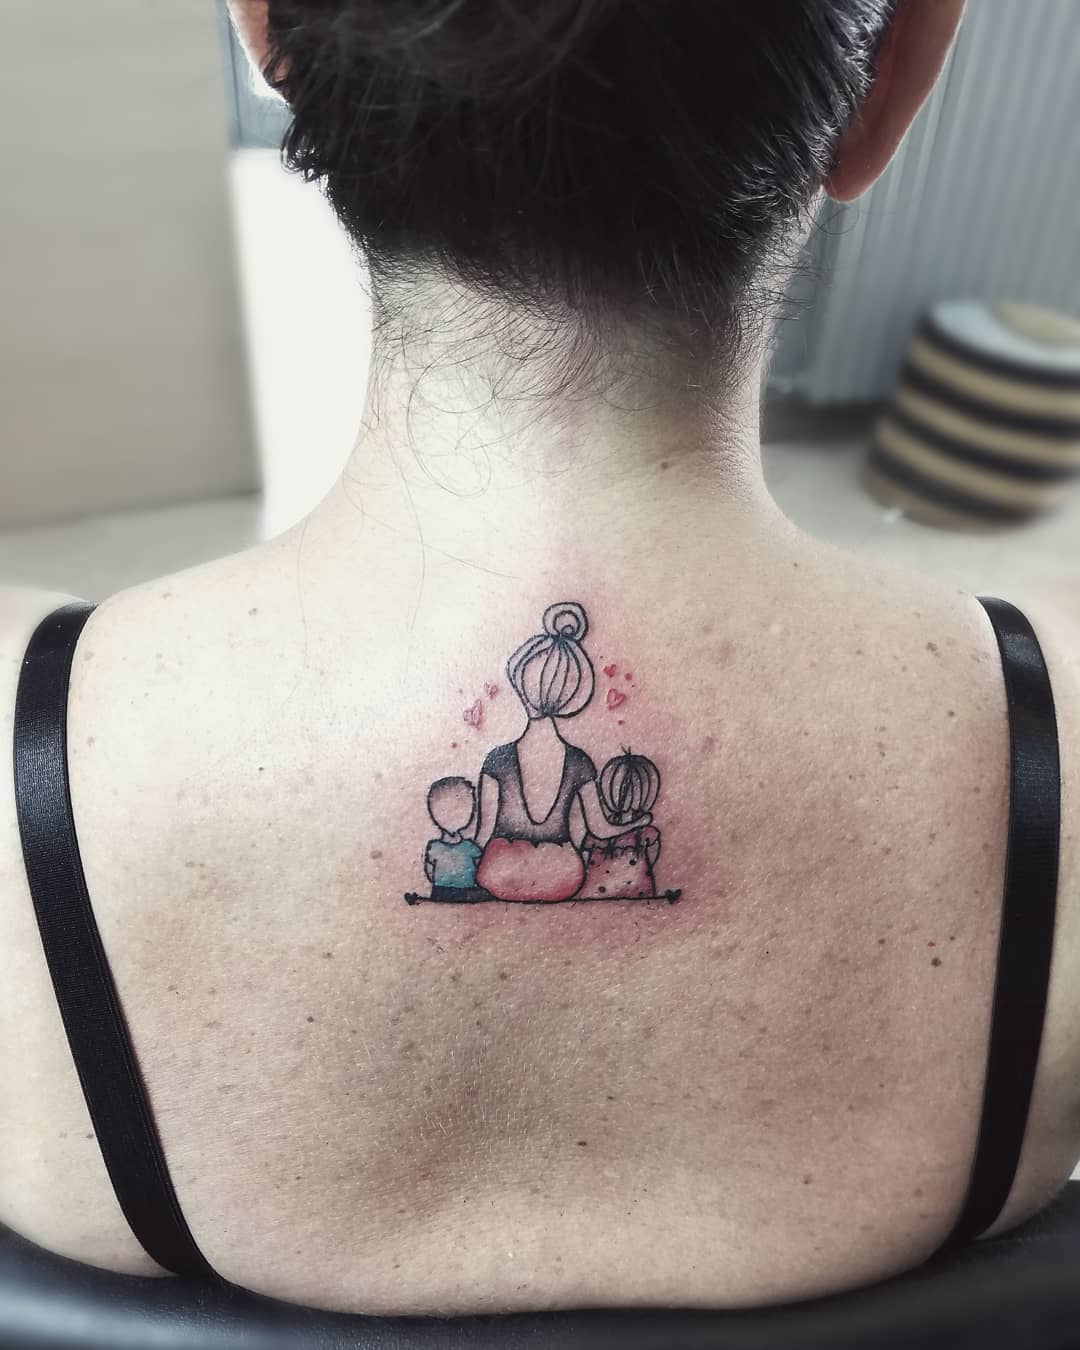 125 Emotional Family Tattoo Ideas to Showcase Your Love for Them - Wild Tattoo Art